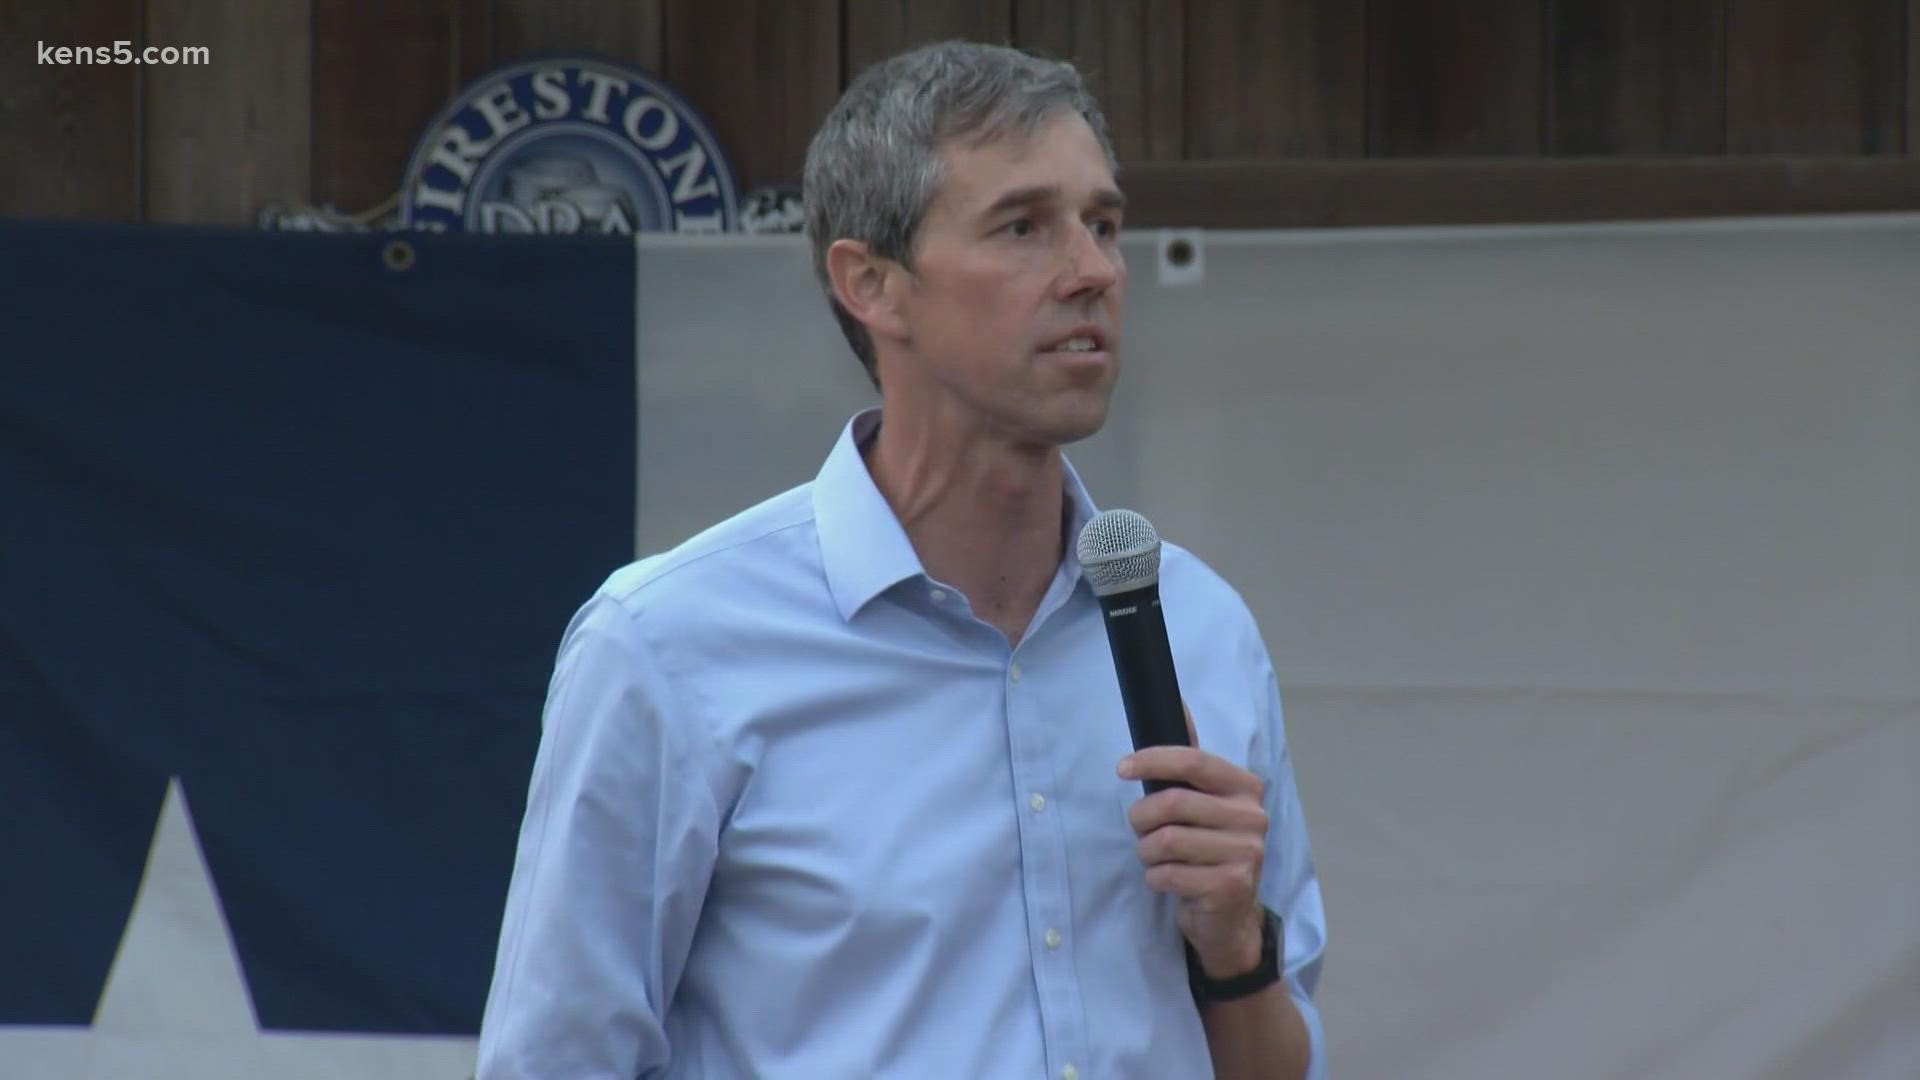 O'Rourke slammed the governor in San Antonio Wednesday, ahead of an anticipated cold front that could bring winter weather to the Alamo City.